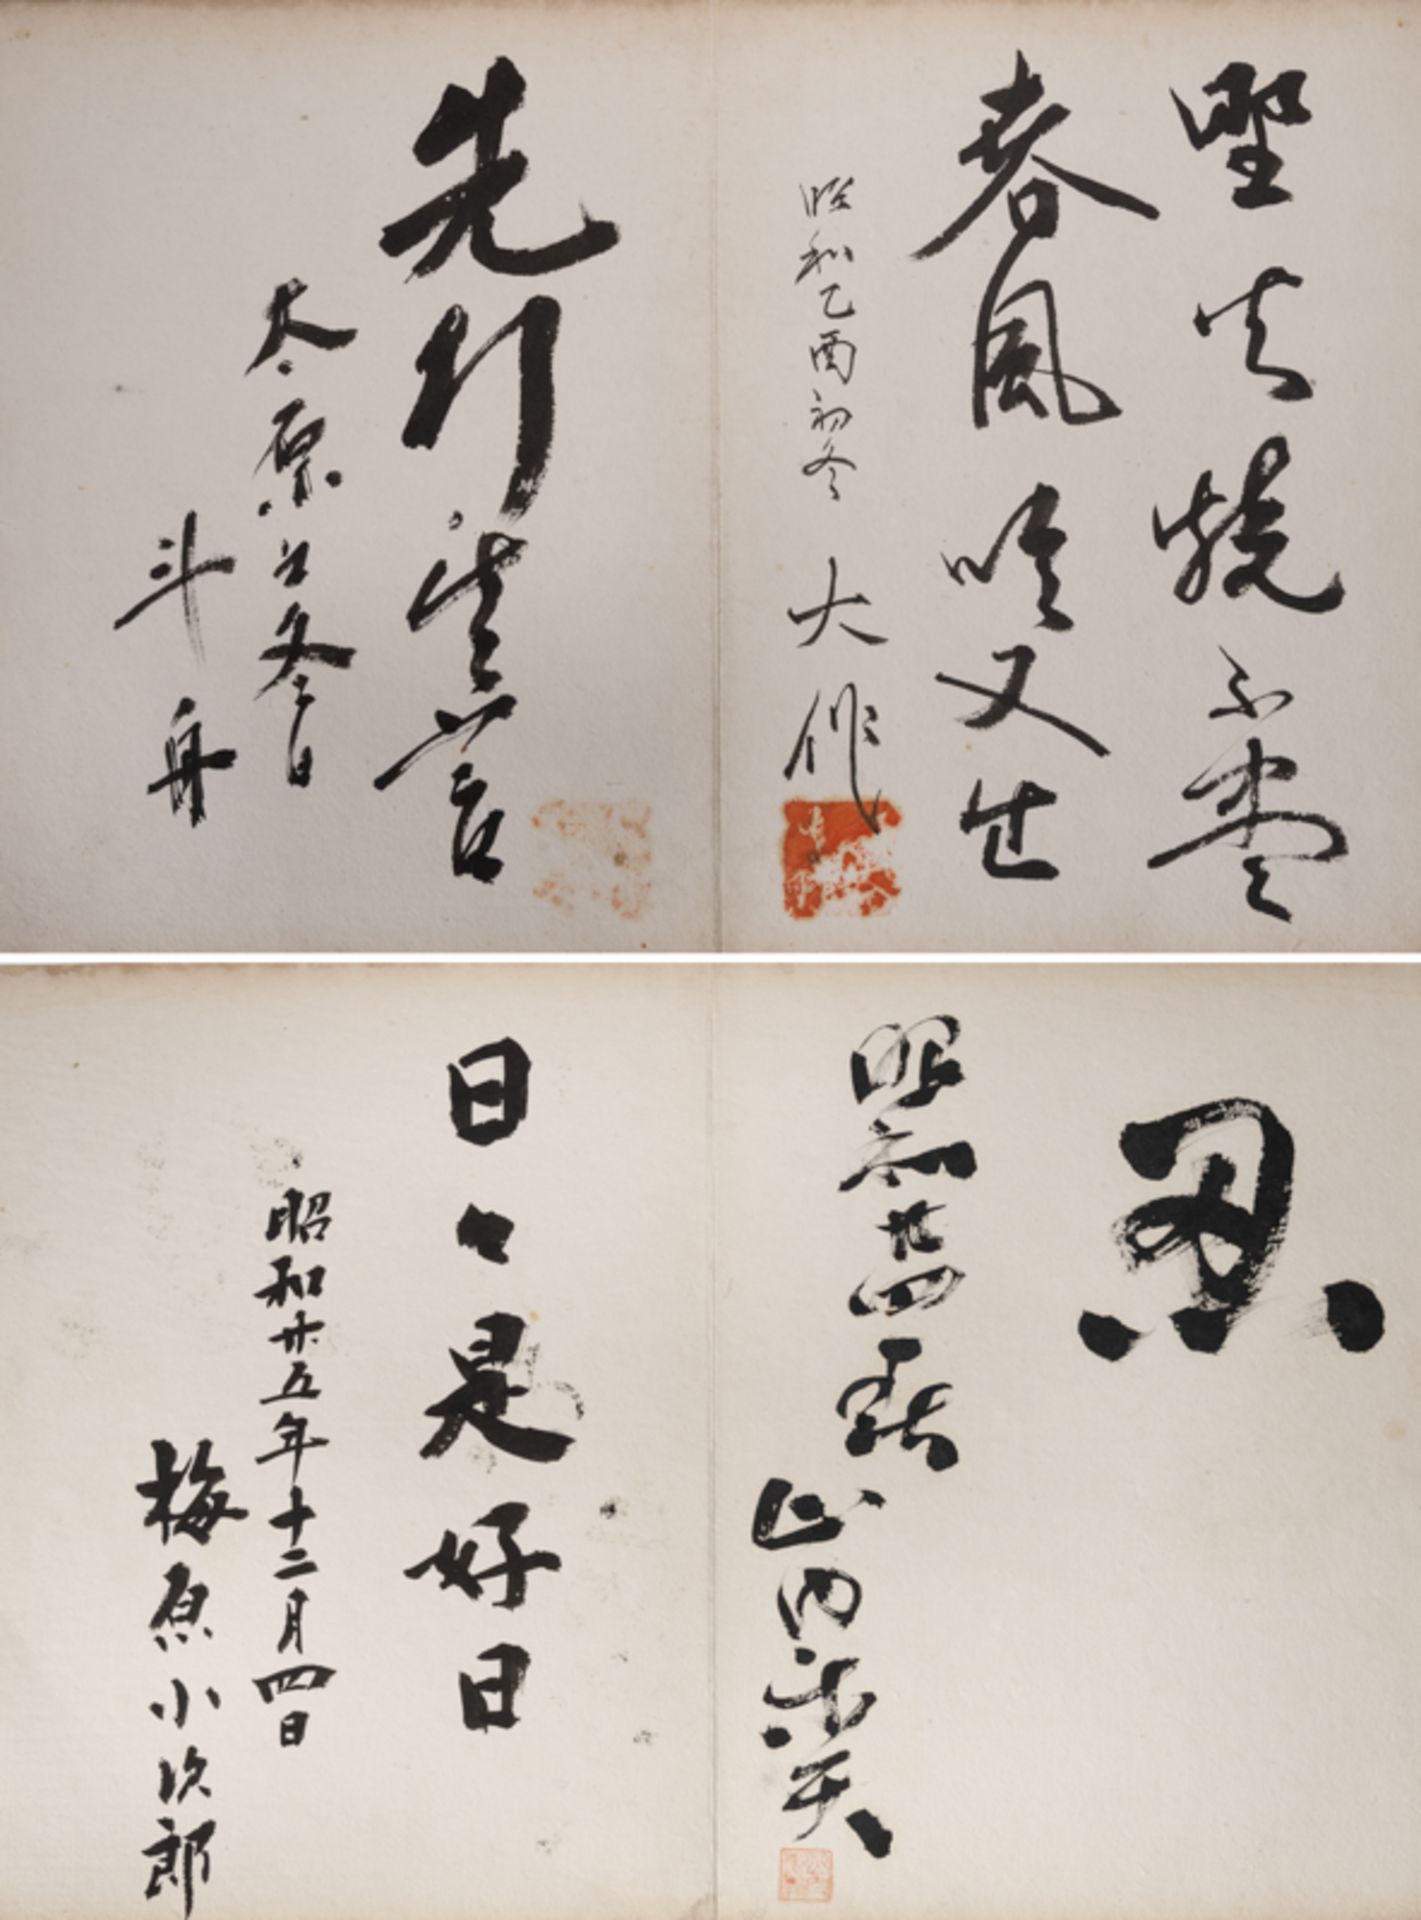 A BOOK OF CALLIGRAPHIES FROM SOME EAST ASIAN CELEBRITIES 東亞名人題字紀念冊頁 - Image 9 of 16